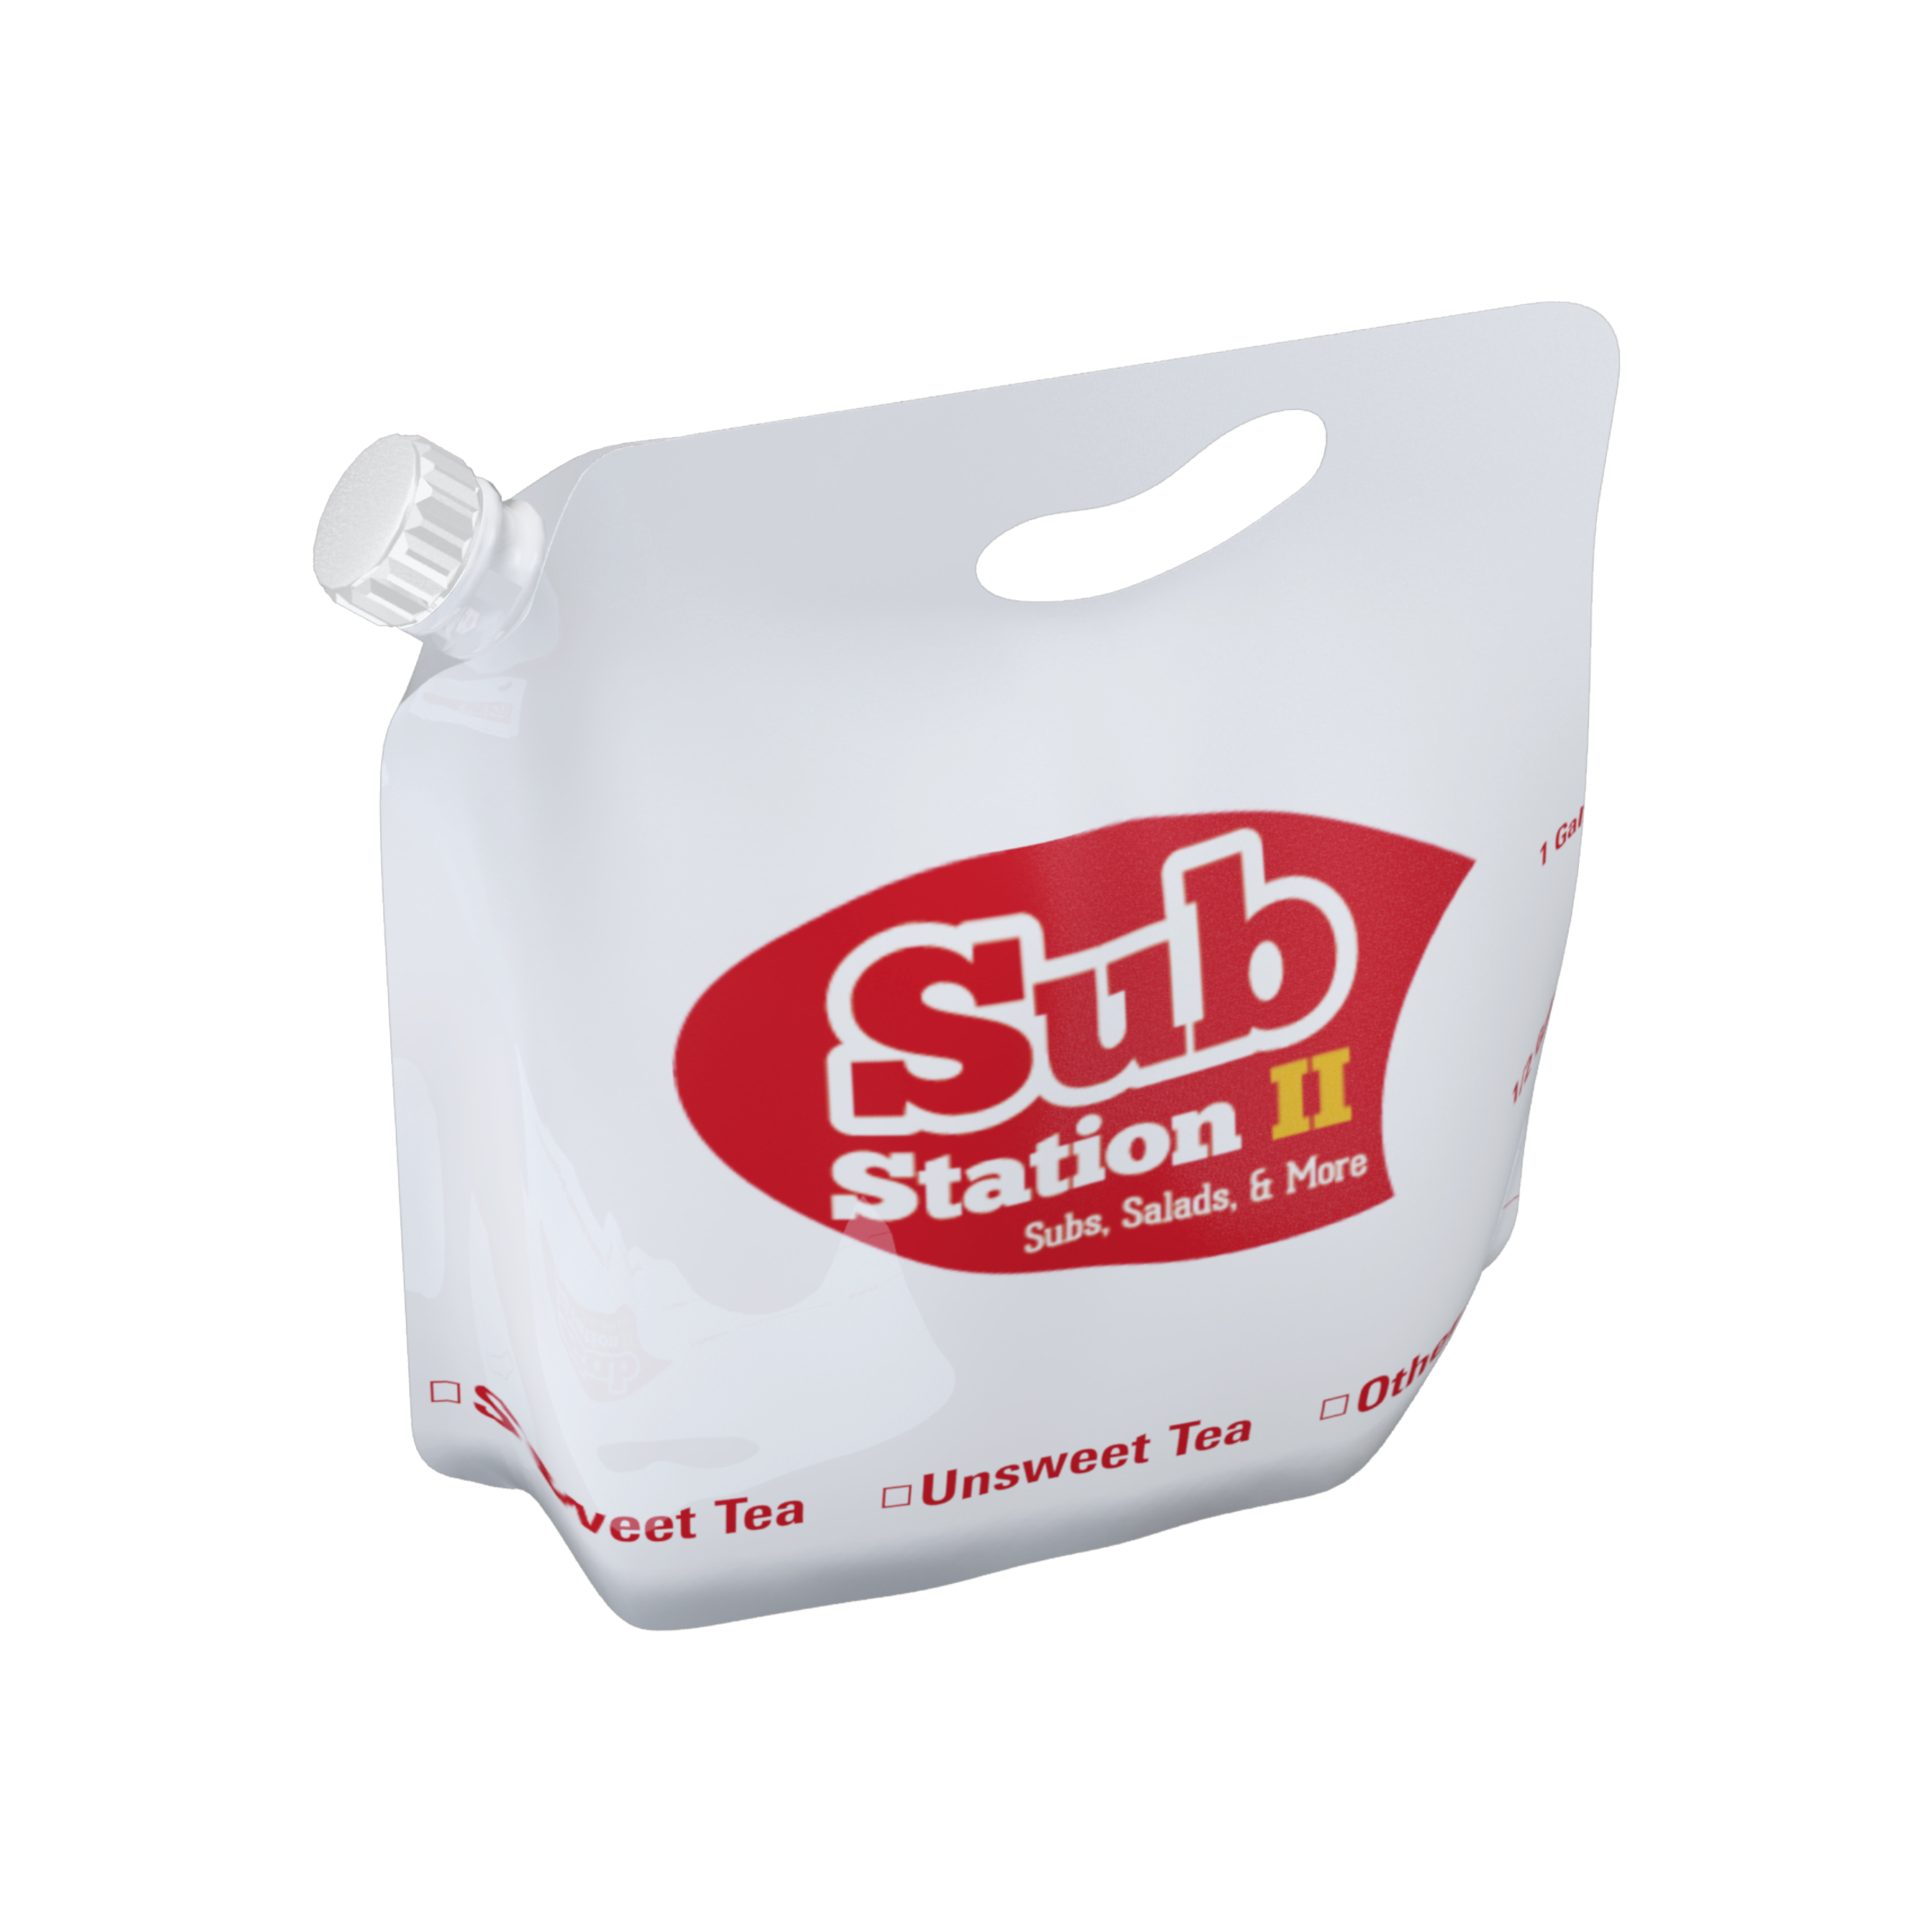 Beverage Bag 1 and 1/2 Gallon  Beverage Bags - Custom Branded Products -  RP & Associates